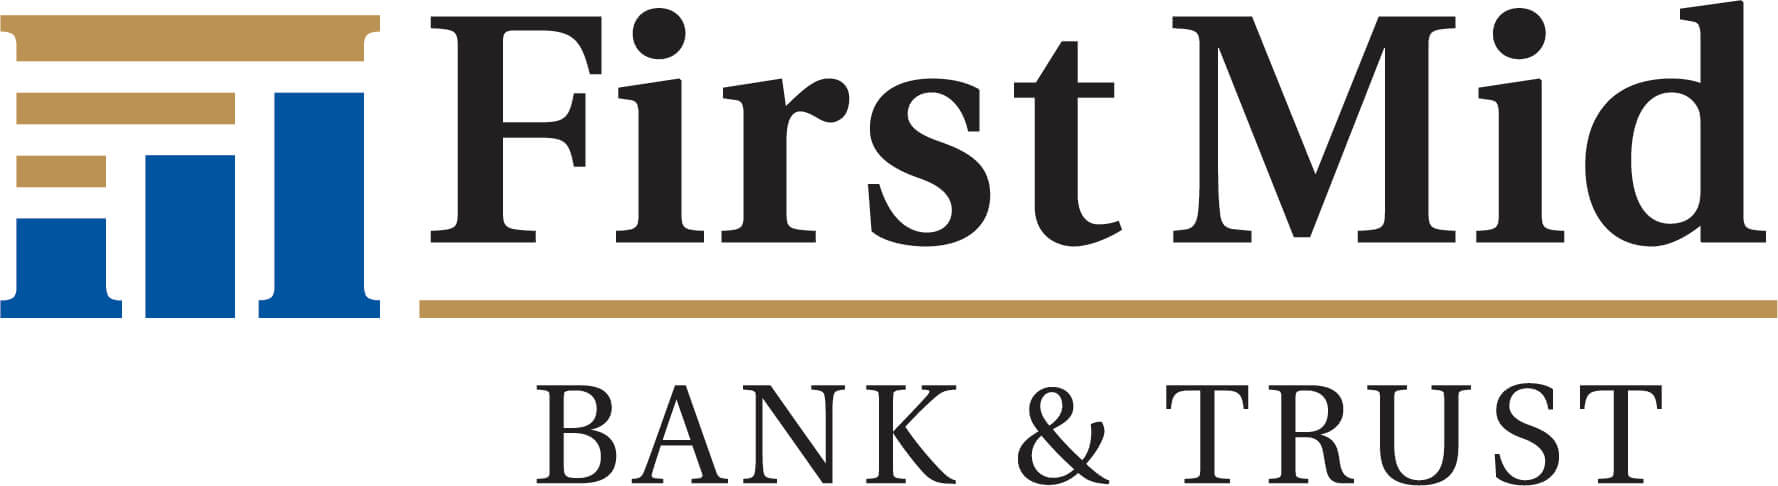 First Mid Bank & Trust 2